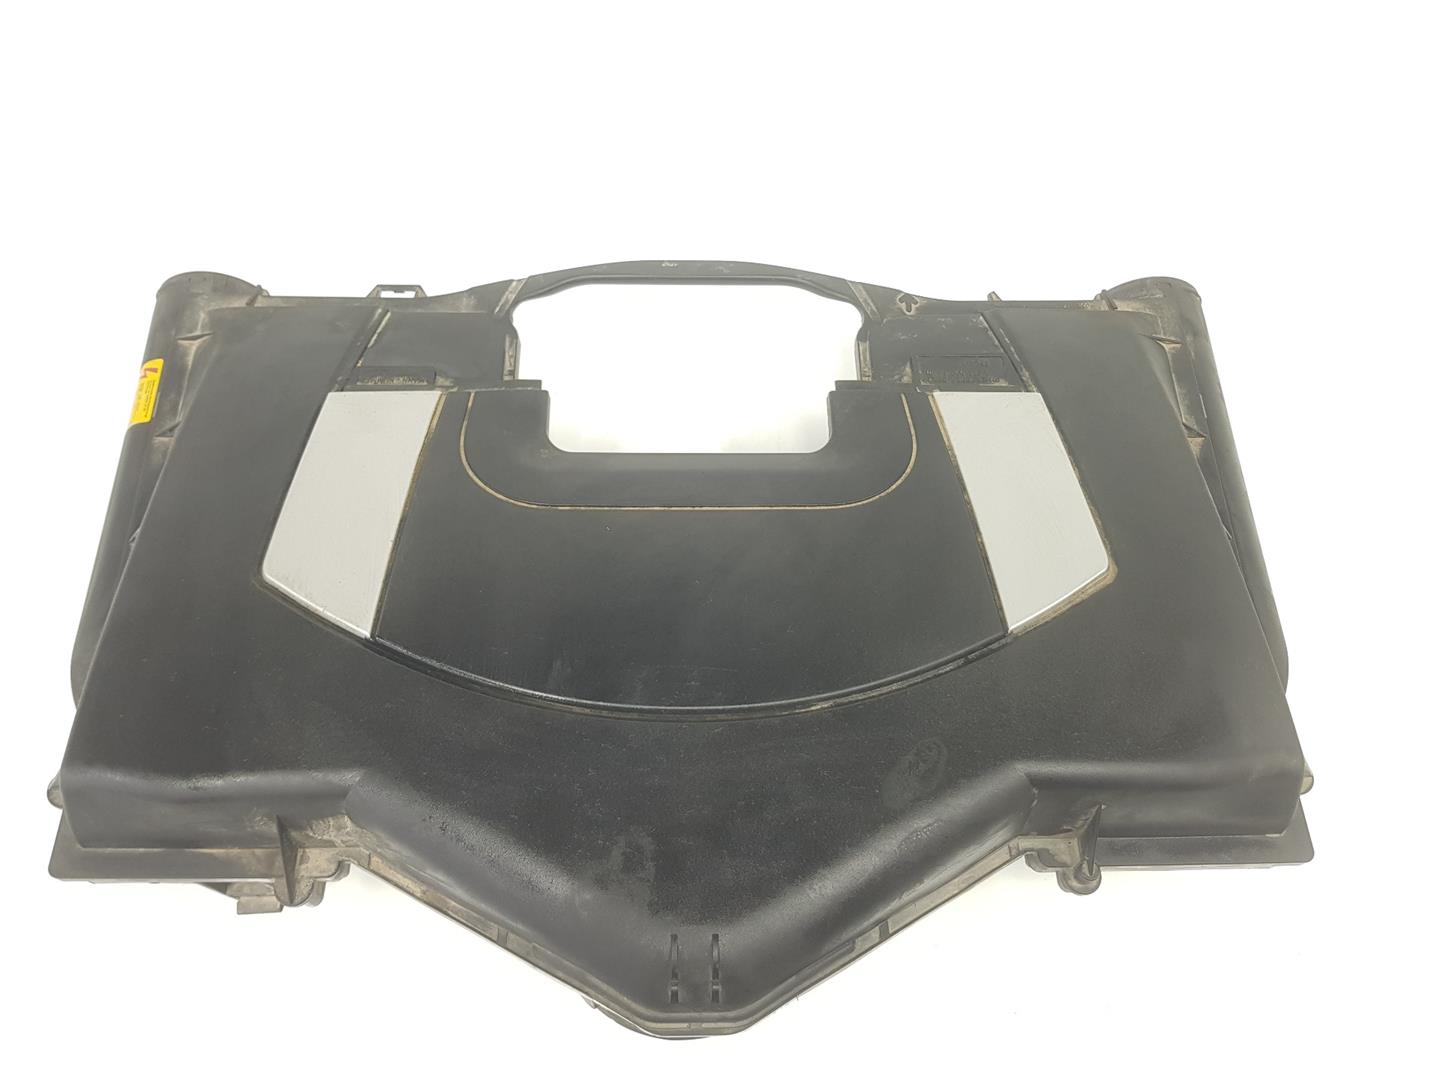 MERCEDES-BENZ M-Class W164 (2005-2011) Other Engine Compartment Parts A2730900401, A2730900401 24218944